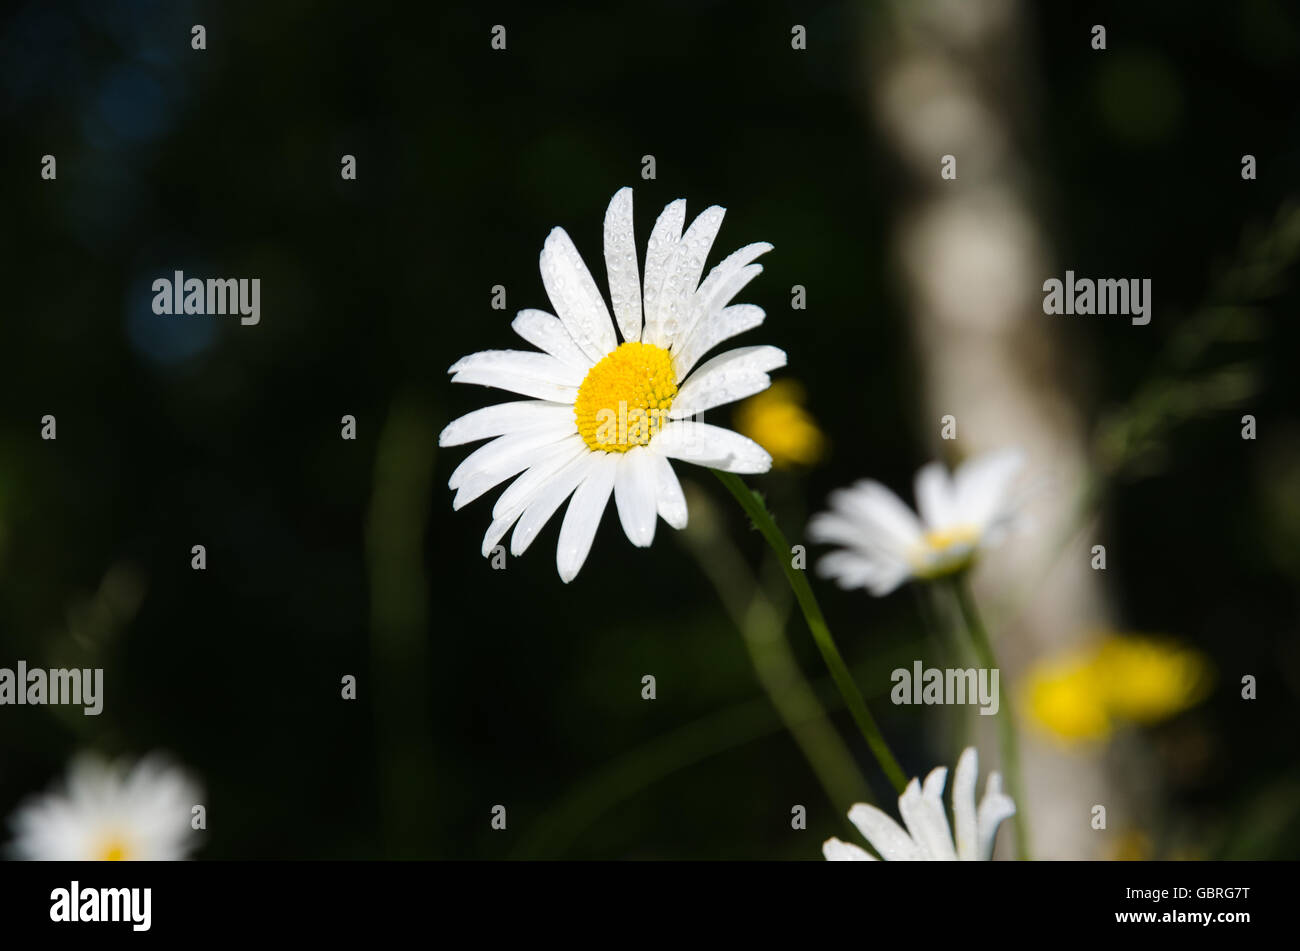 Glowing daisy with water drops at a dark natural background Stock Photo